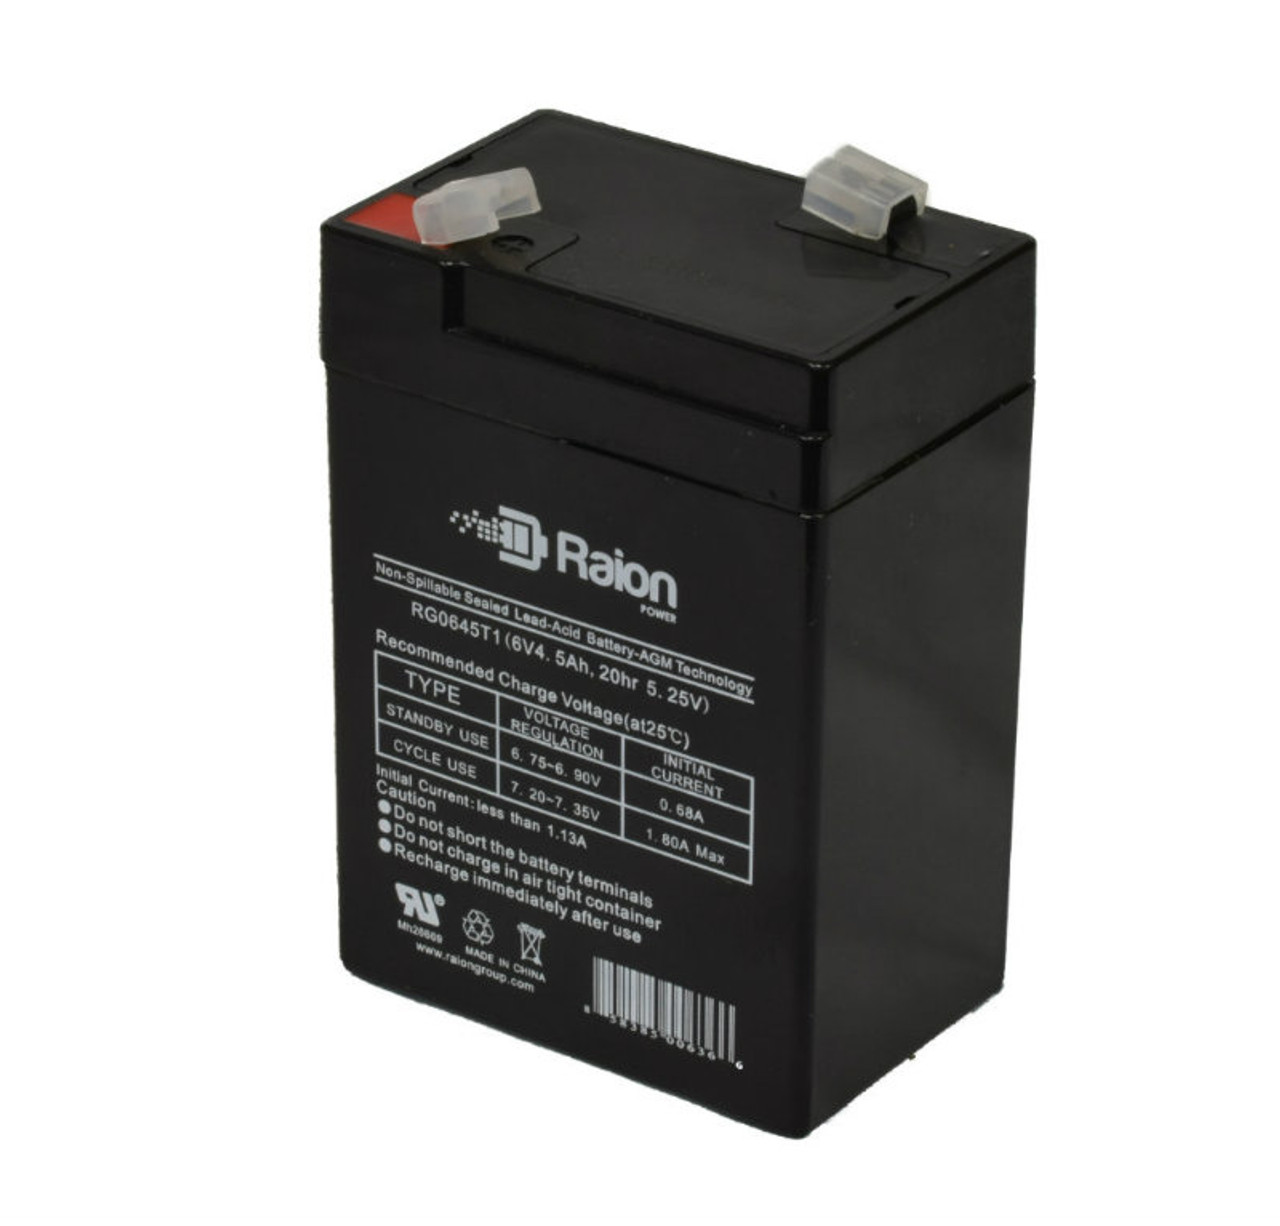 Raion Power RG0645T1 6V 4.5Ah Replacement Battery Cartridge for Sentry Lite SCR52520